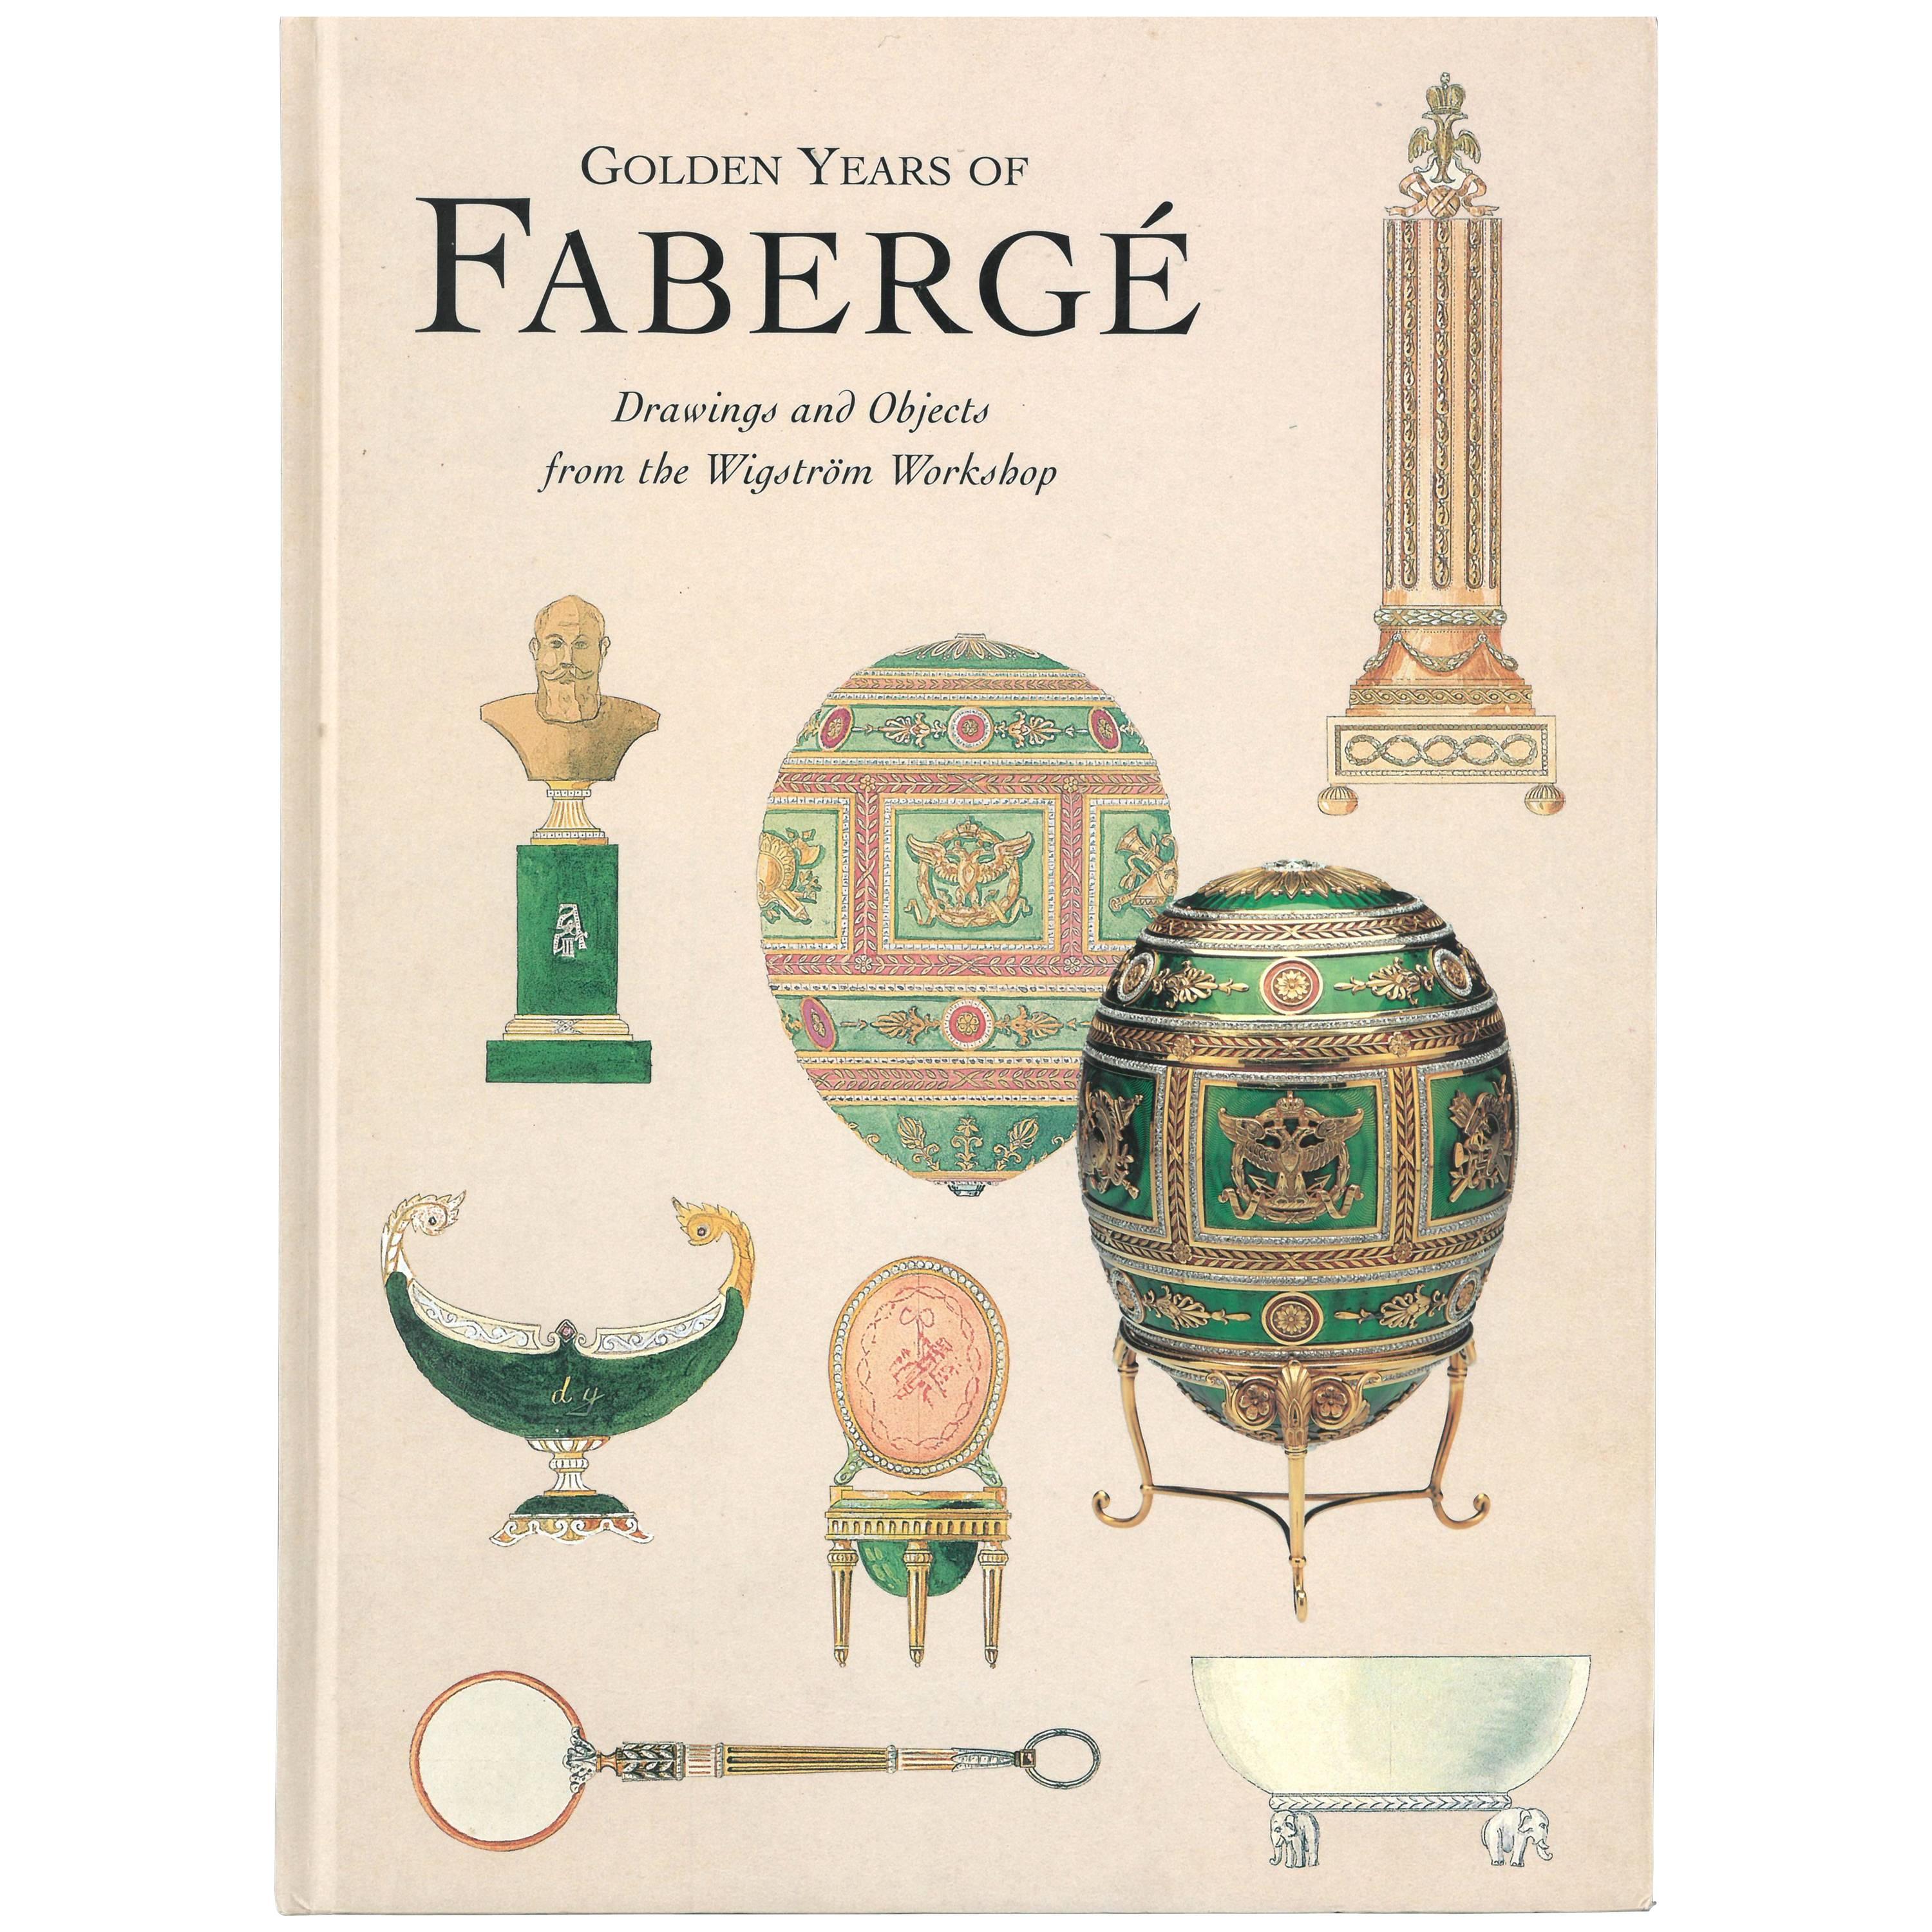 A hardback book which presents an album of drawings from the workshop of Henrik Wigstrom, who was the leading work master at Faberge from 1903 to 1918, it includes many watercolour illustrations of the most wonderful objects - including perfume